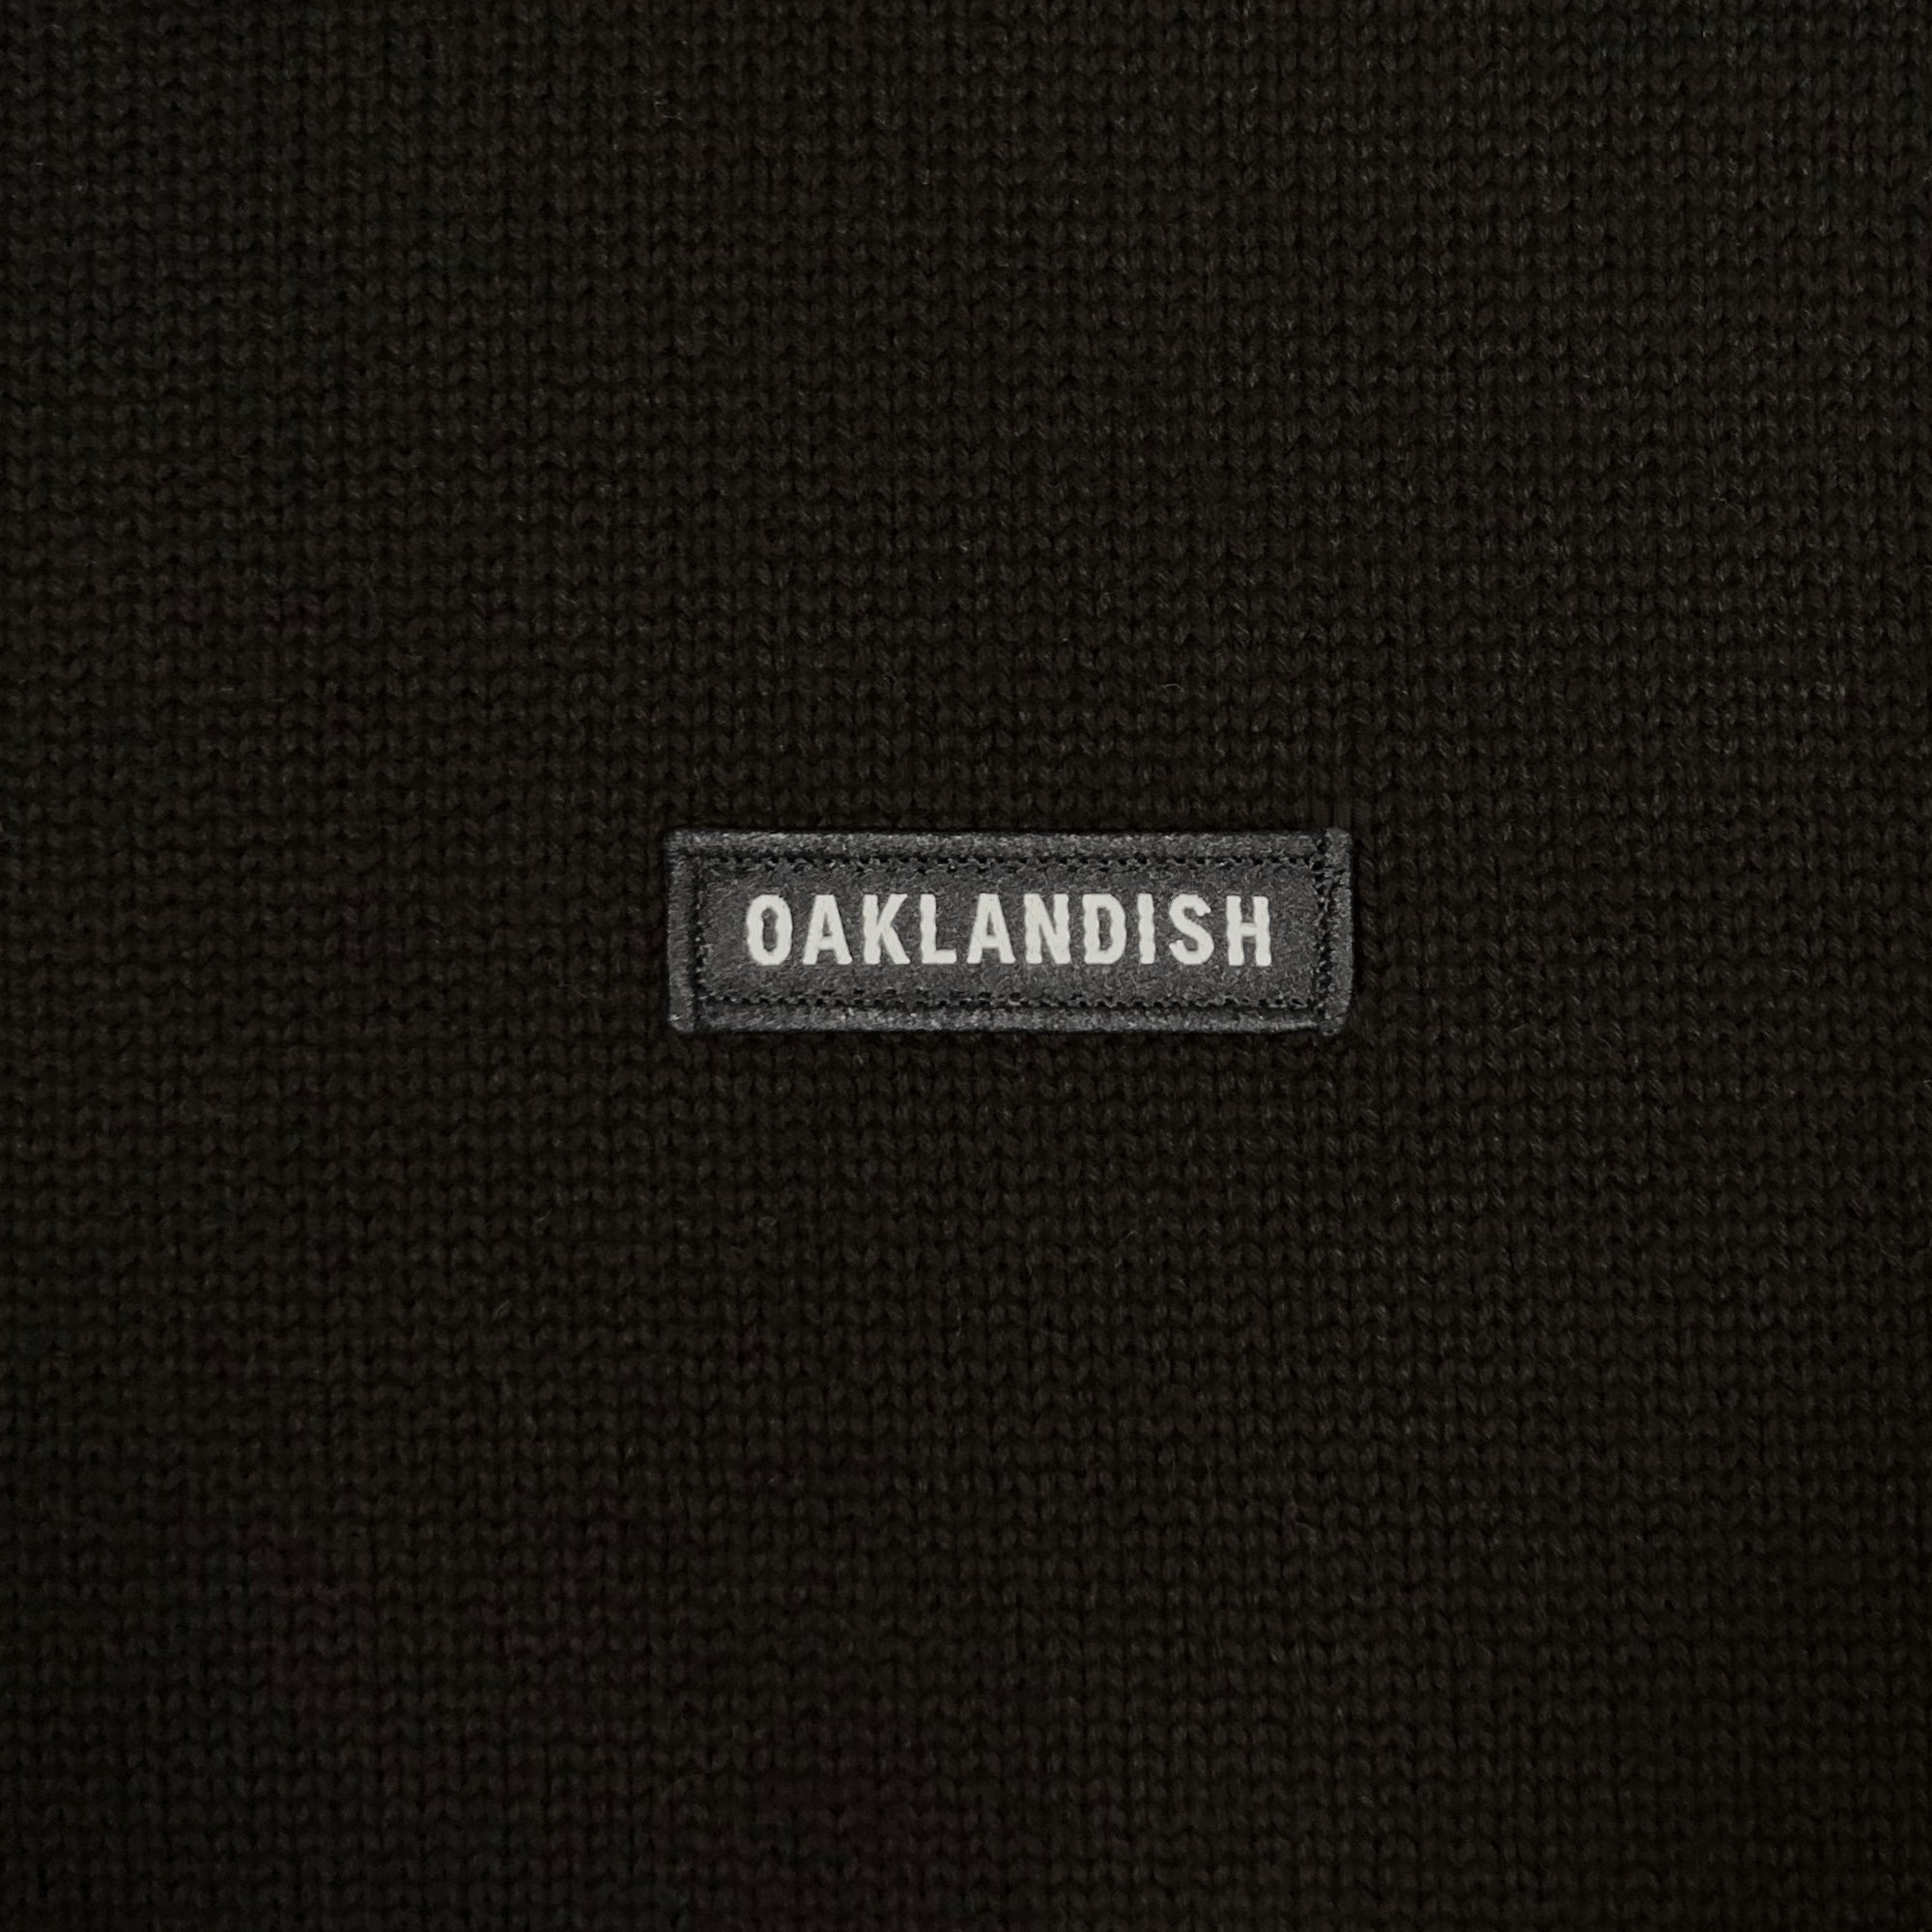 Detailed close-up of embroidered Oaklandish wordmark woven label patch on a black heavy-knit sweater.